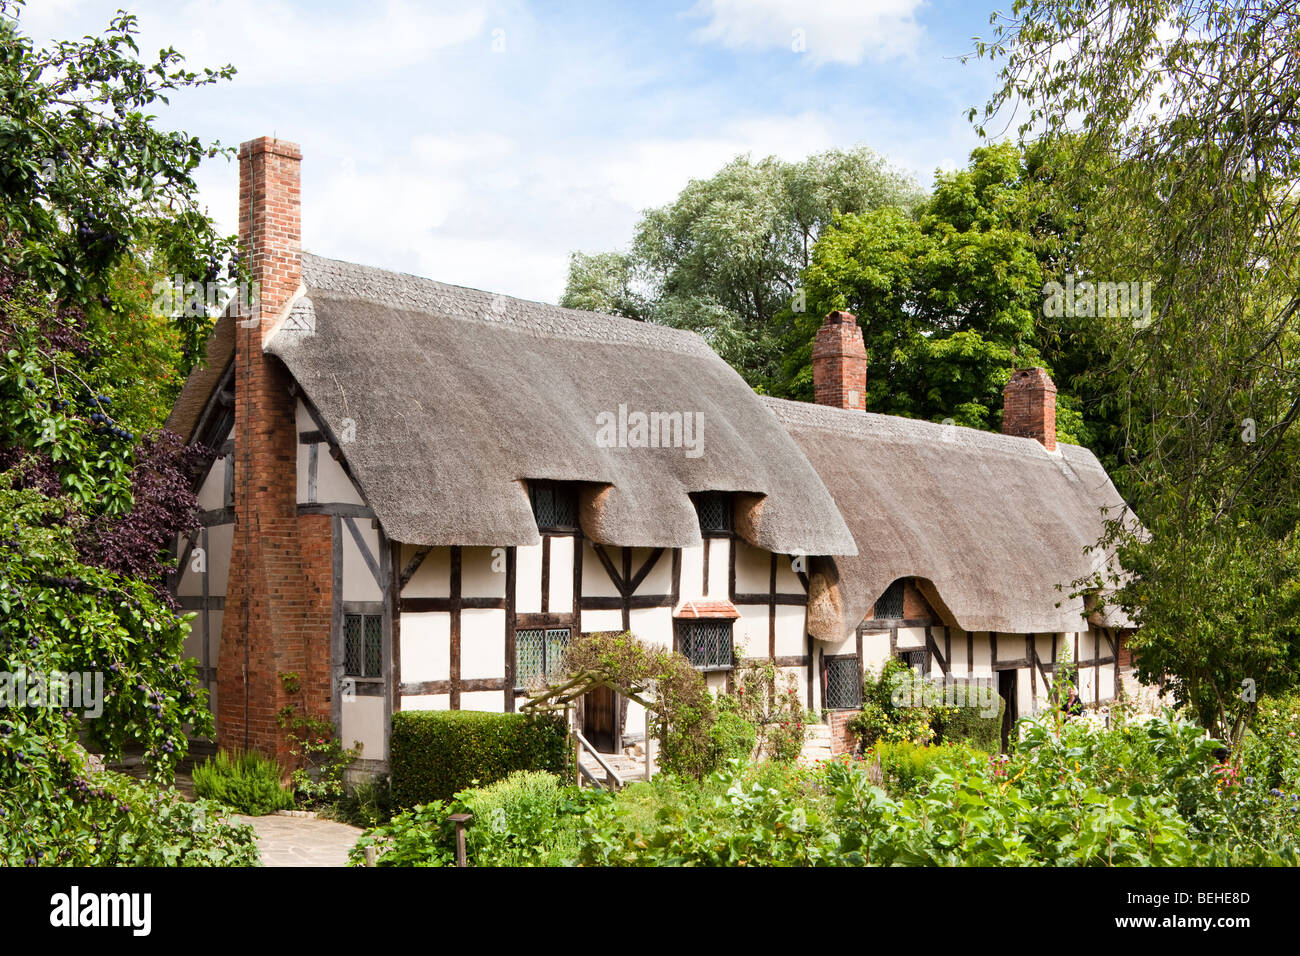 Anne Hathaway's Cottage, Shottery, Stratford upon Avon, Warwickshire UK - Anne was the wife of William Shakespeare. Stock Photo